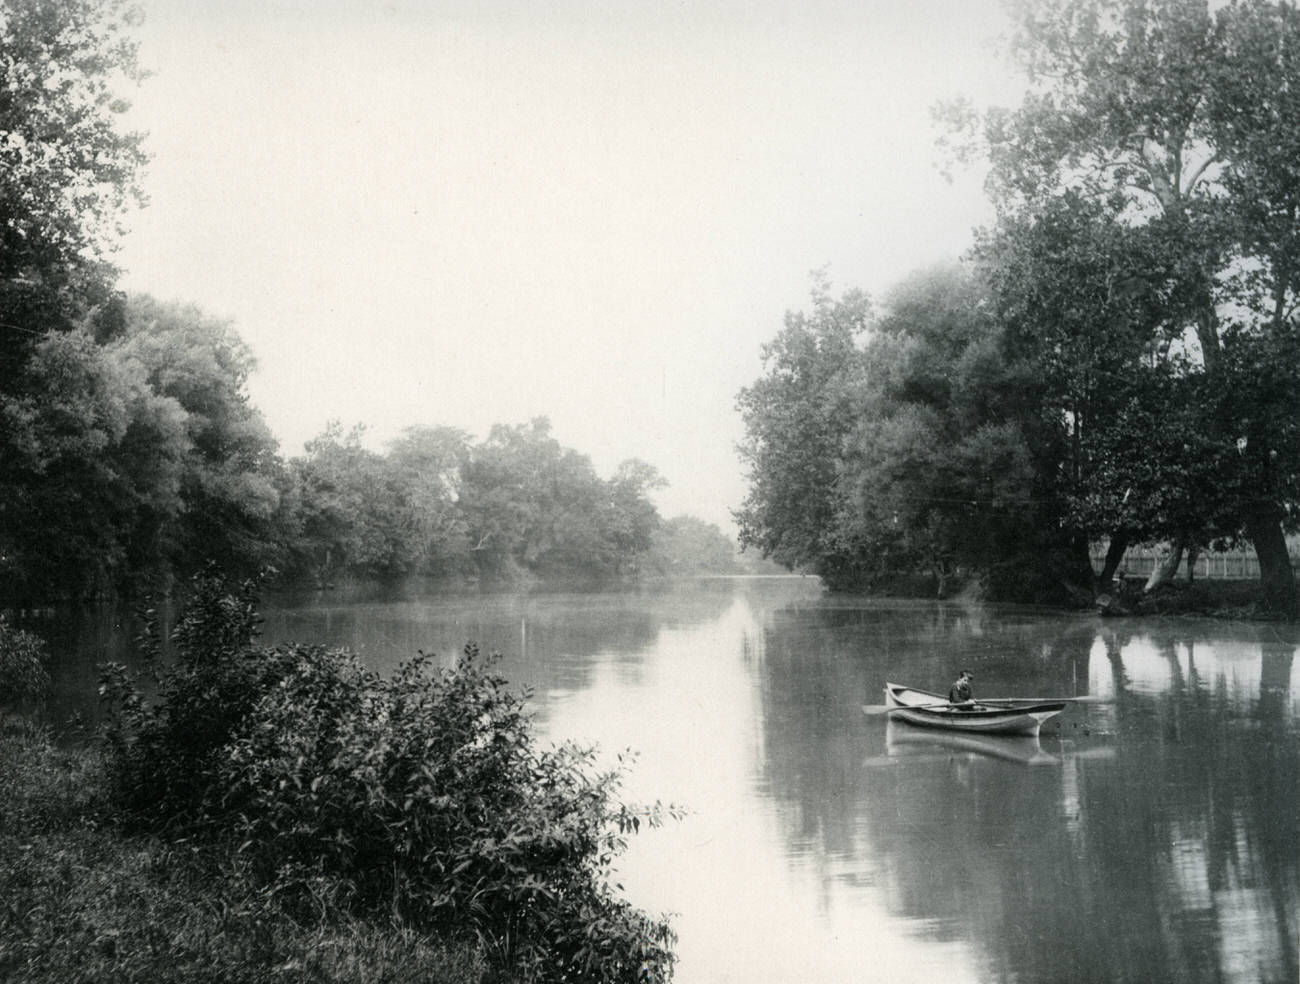 Boater on the Olentangy River, 1897